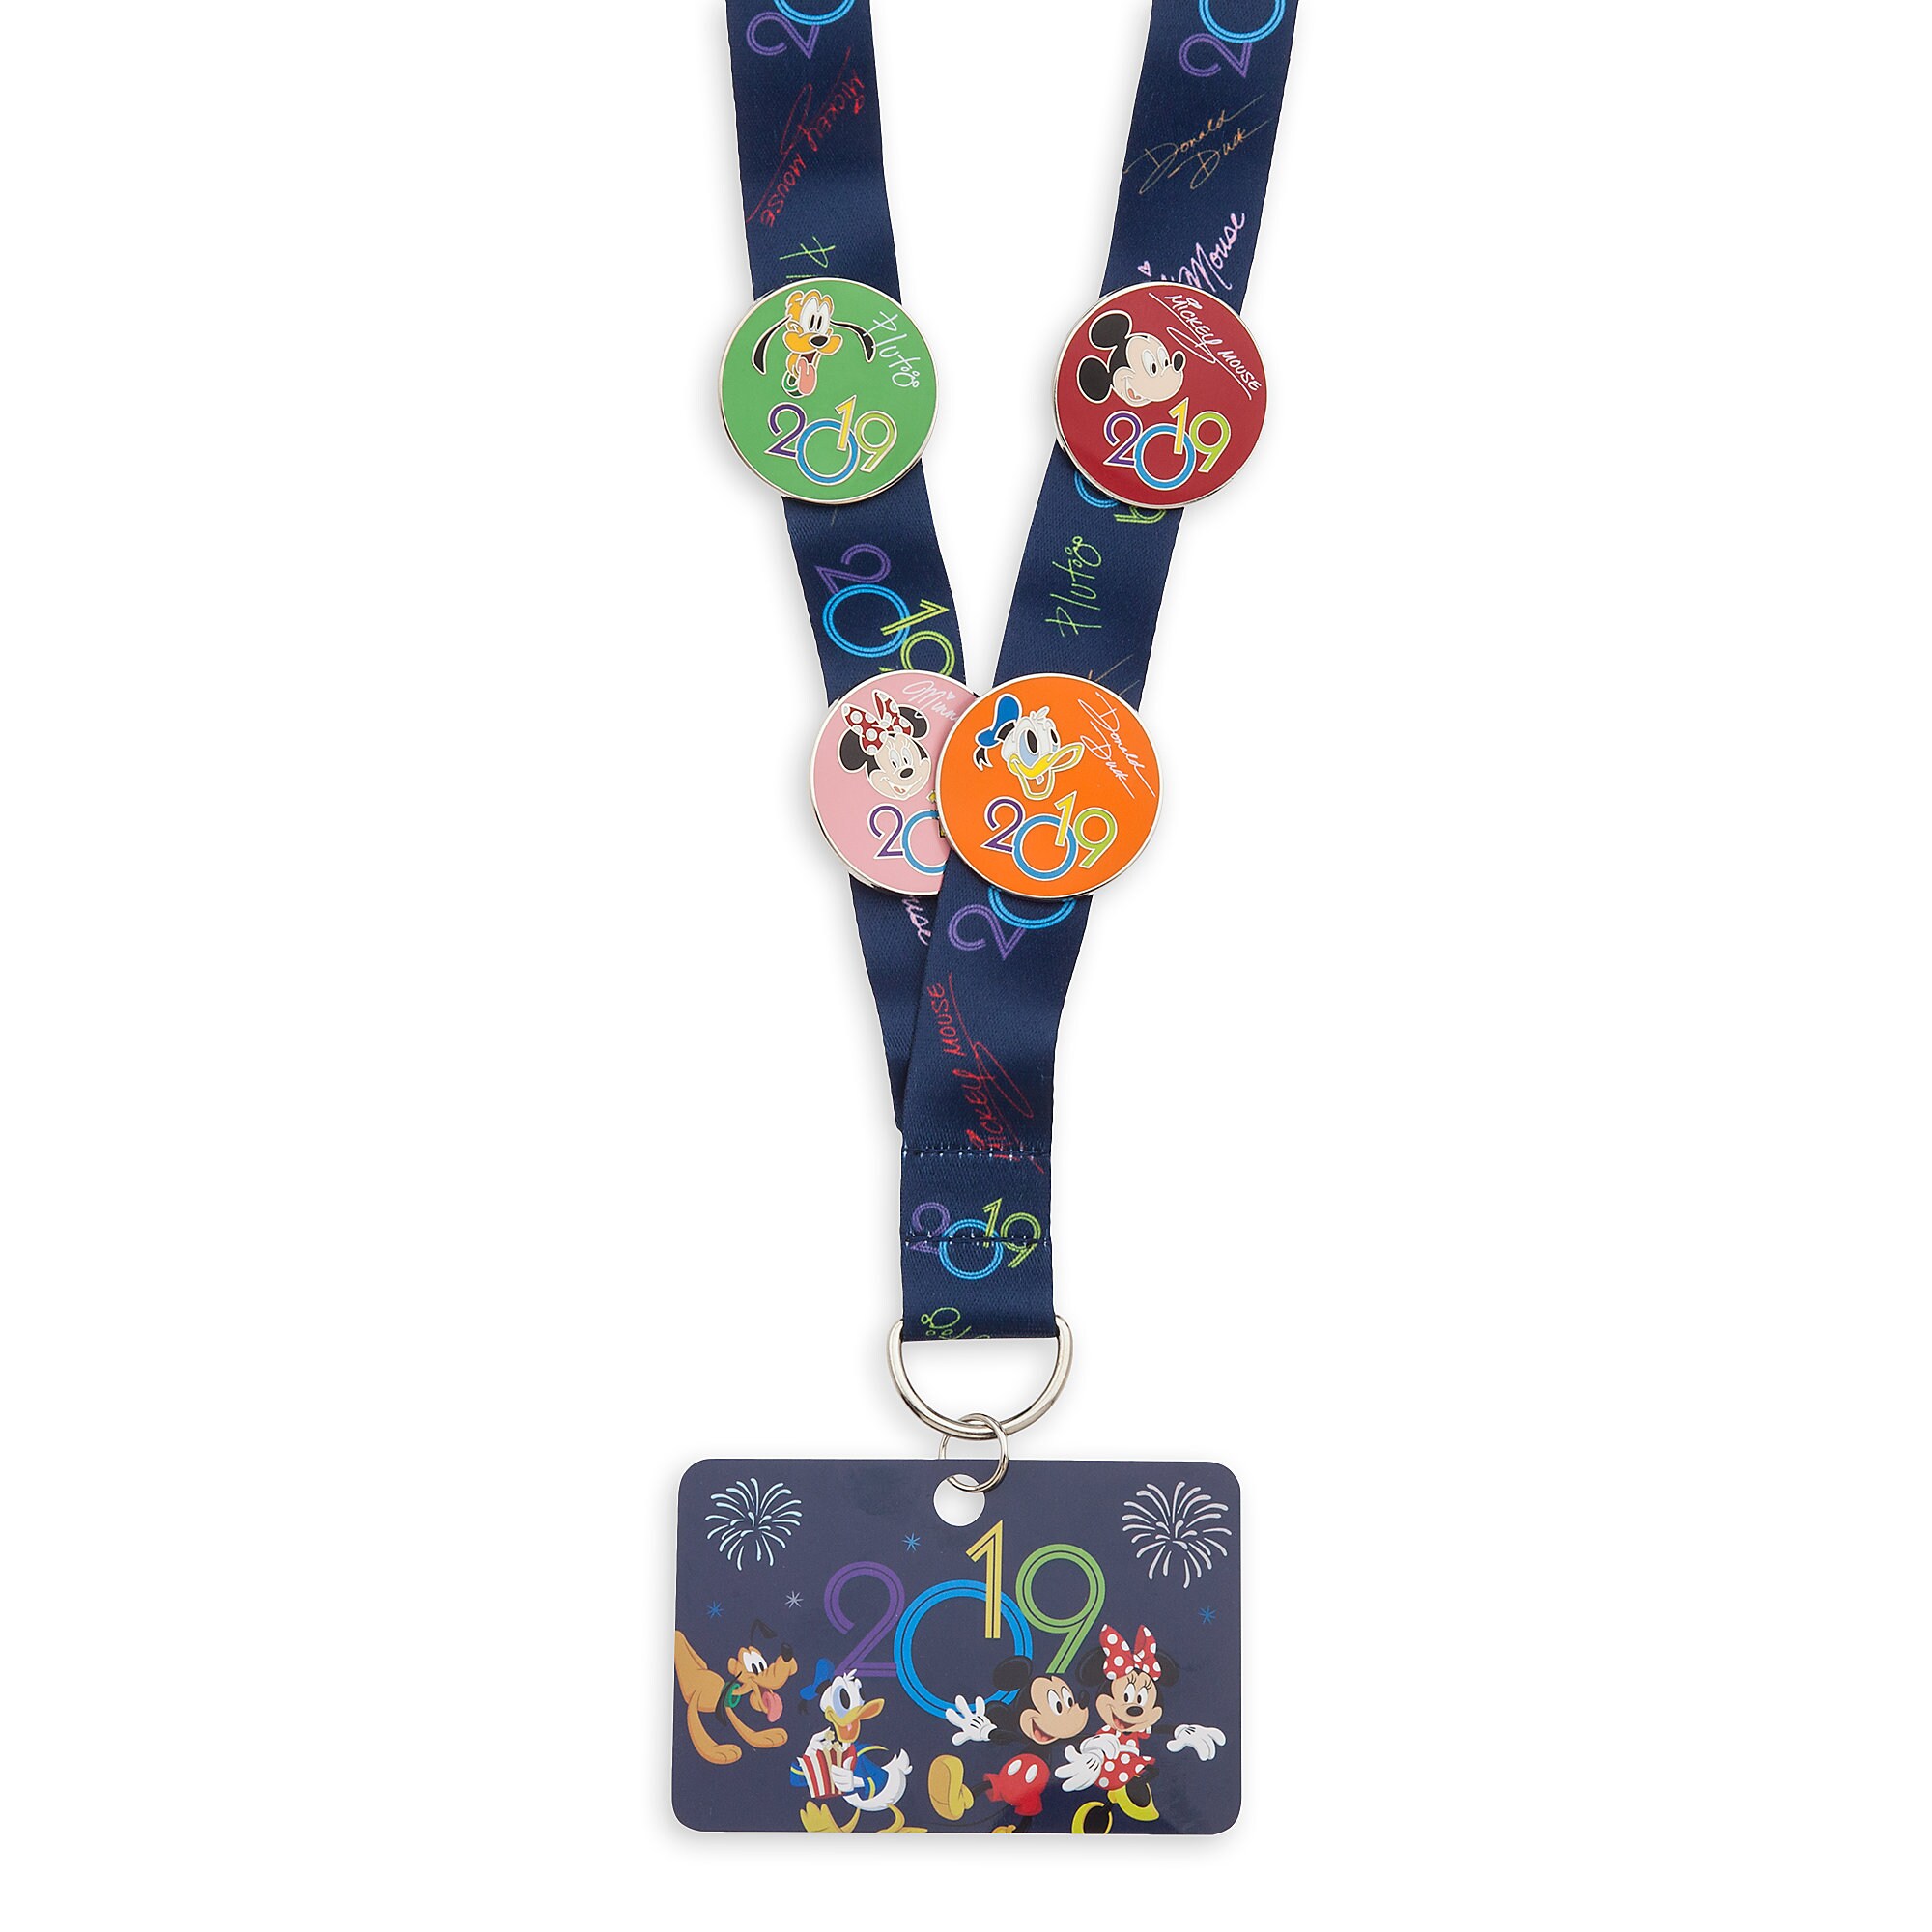 Mickey Mouse and Friends Pin Trading Starter Set - Disney Parks 2019